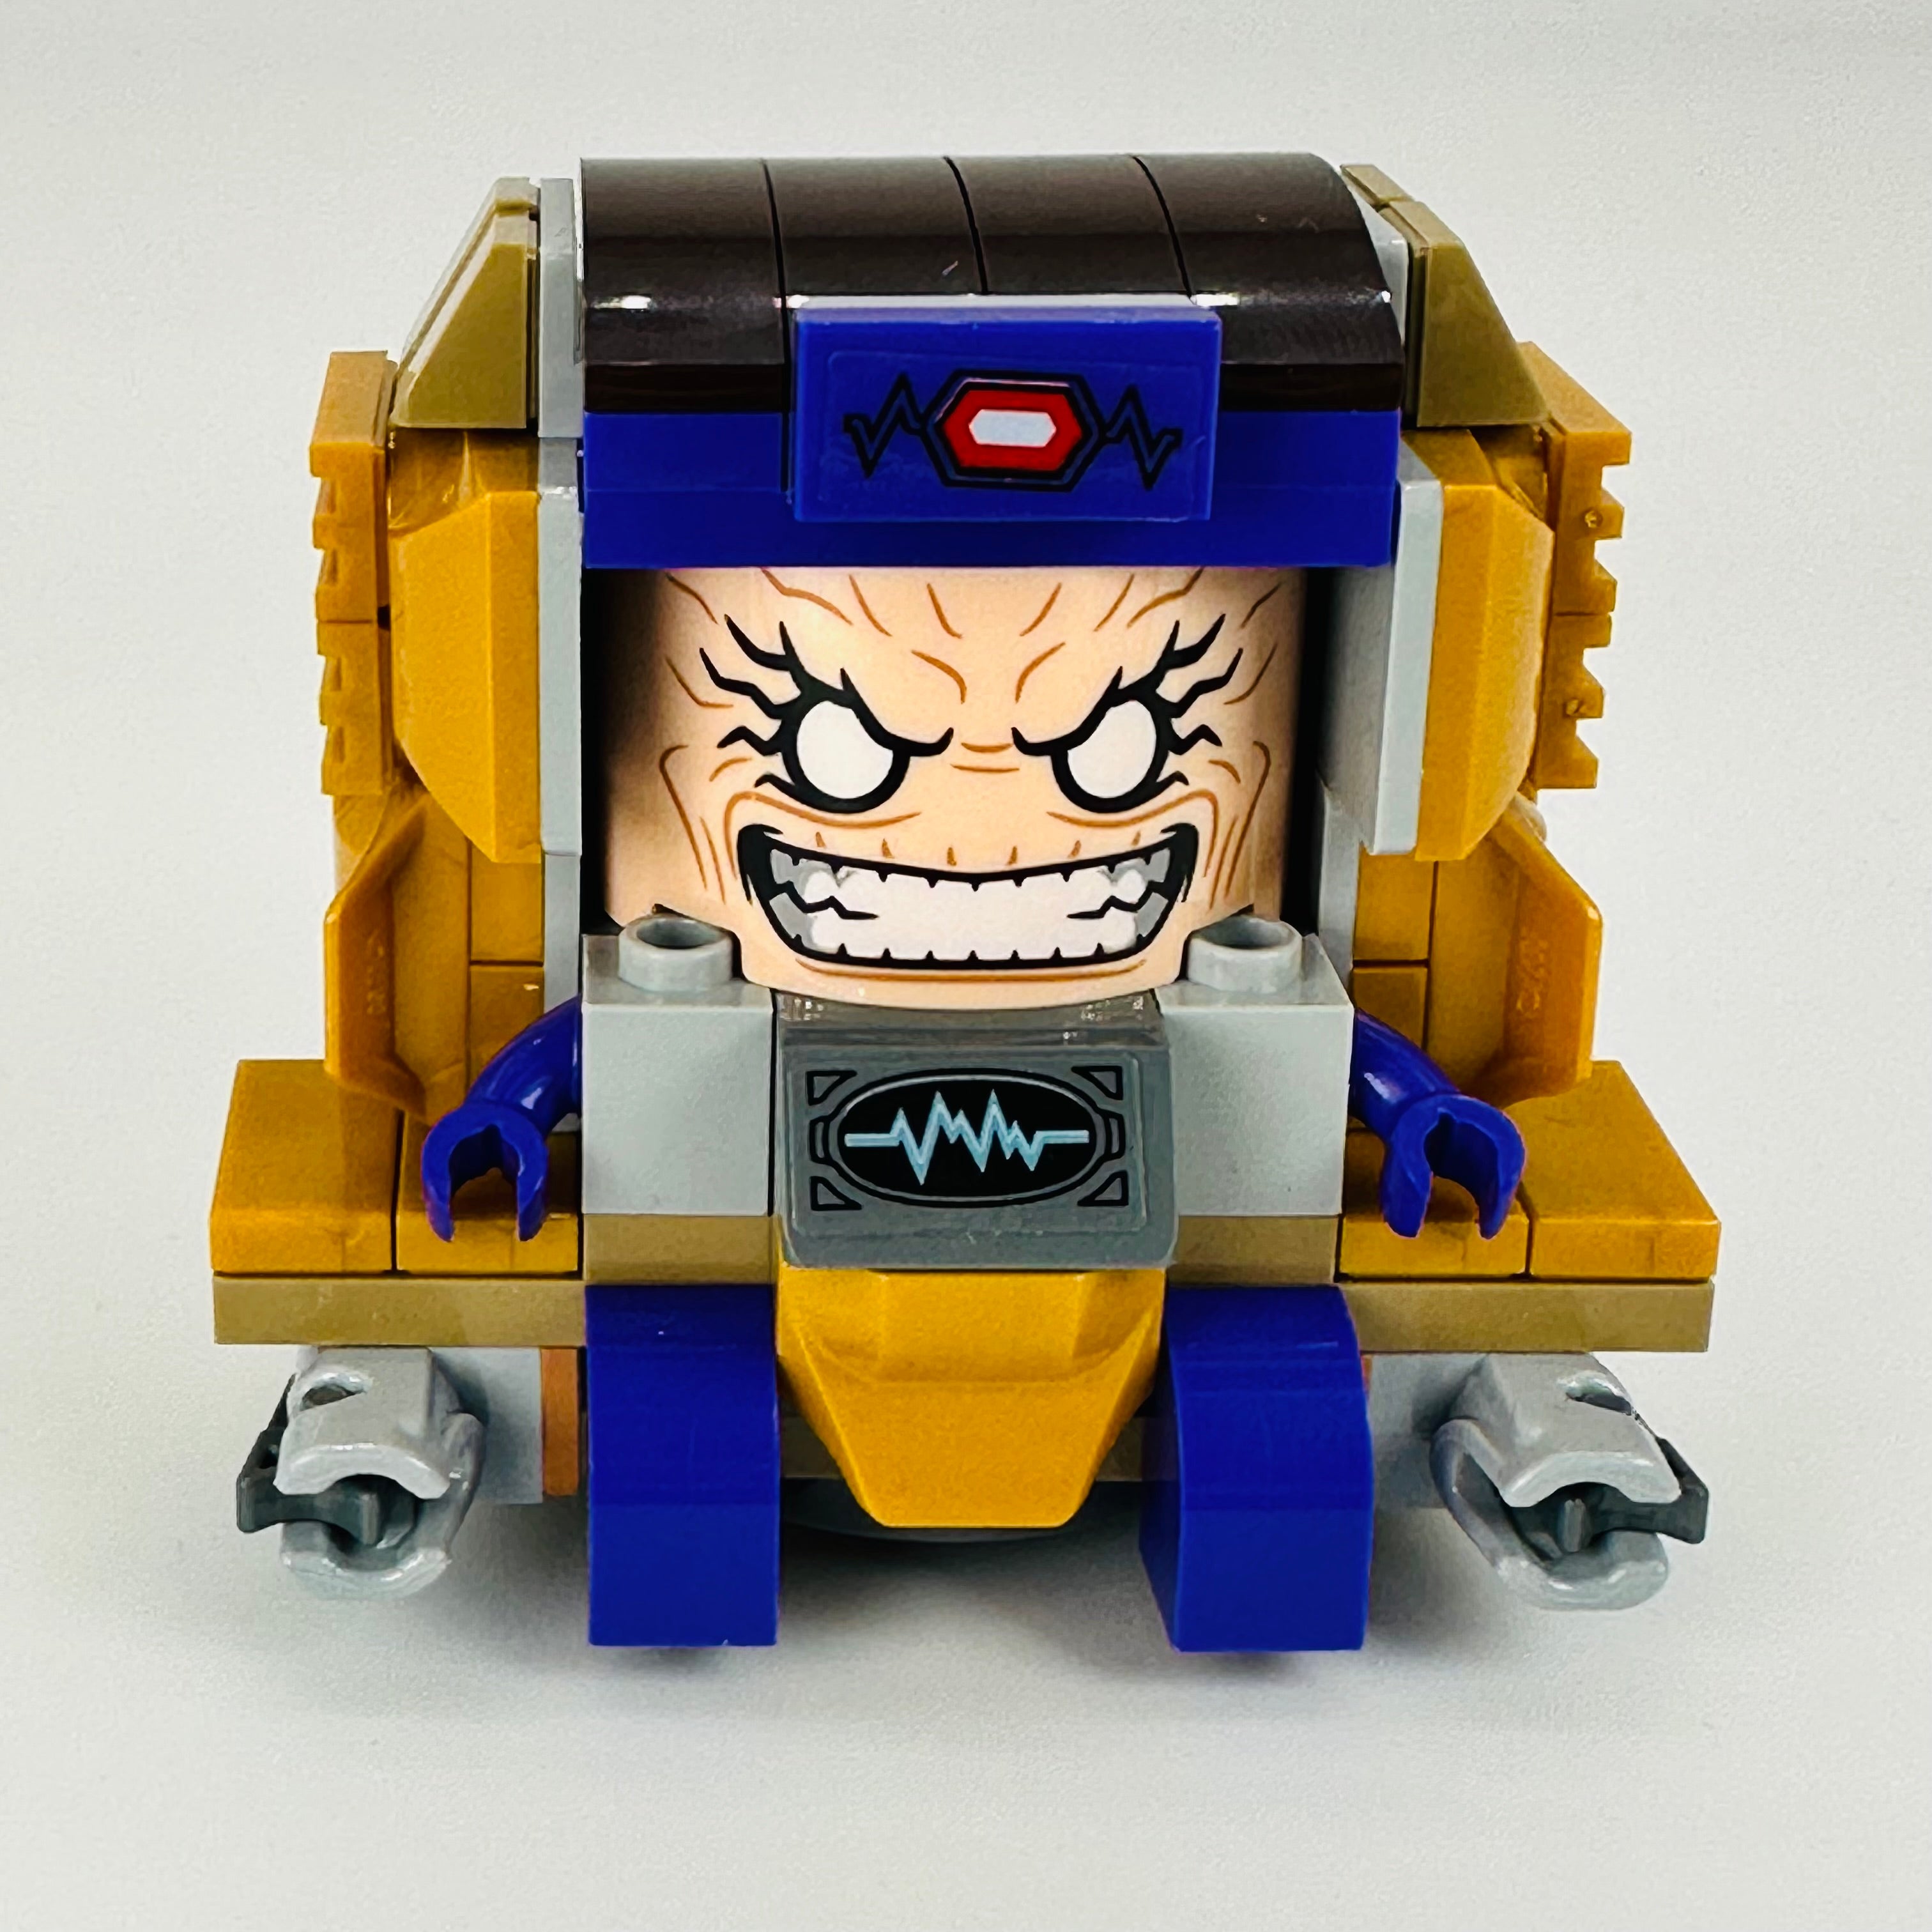 sh656s: MODOK (WITH STICKERS) – Bricks and Minifigs Sioux Falls